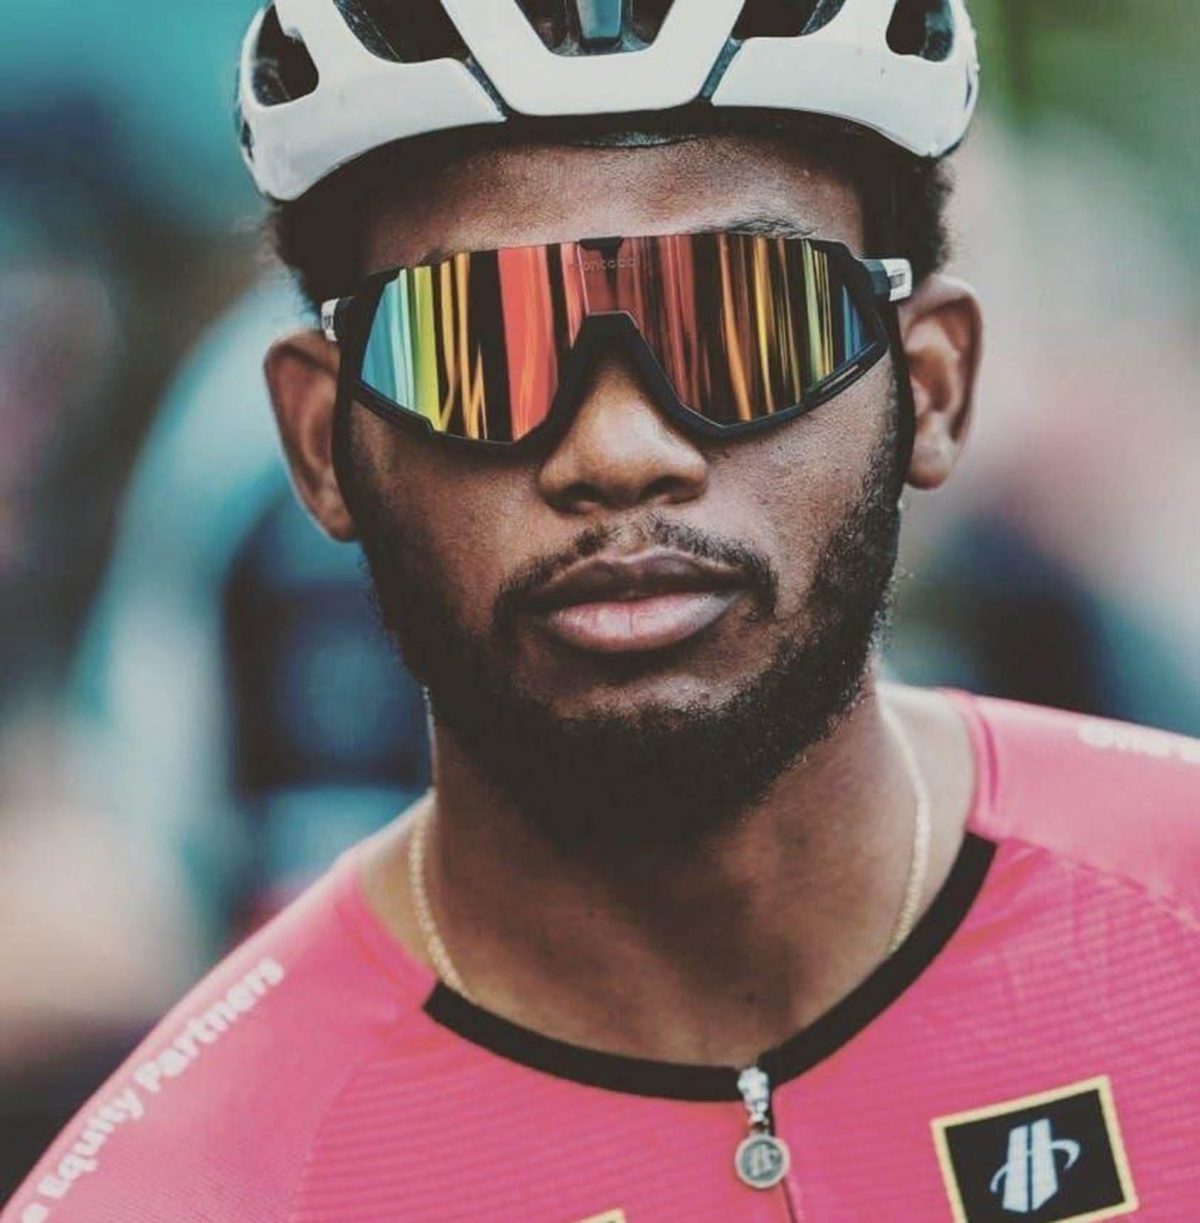 Jamual John is the defending champion of the Randolph ‘Duckie’ Singh Memorial’ Cycle event.